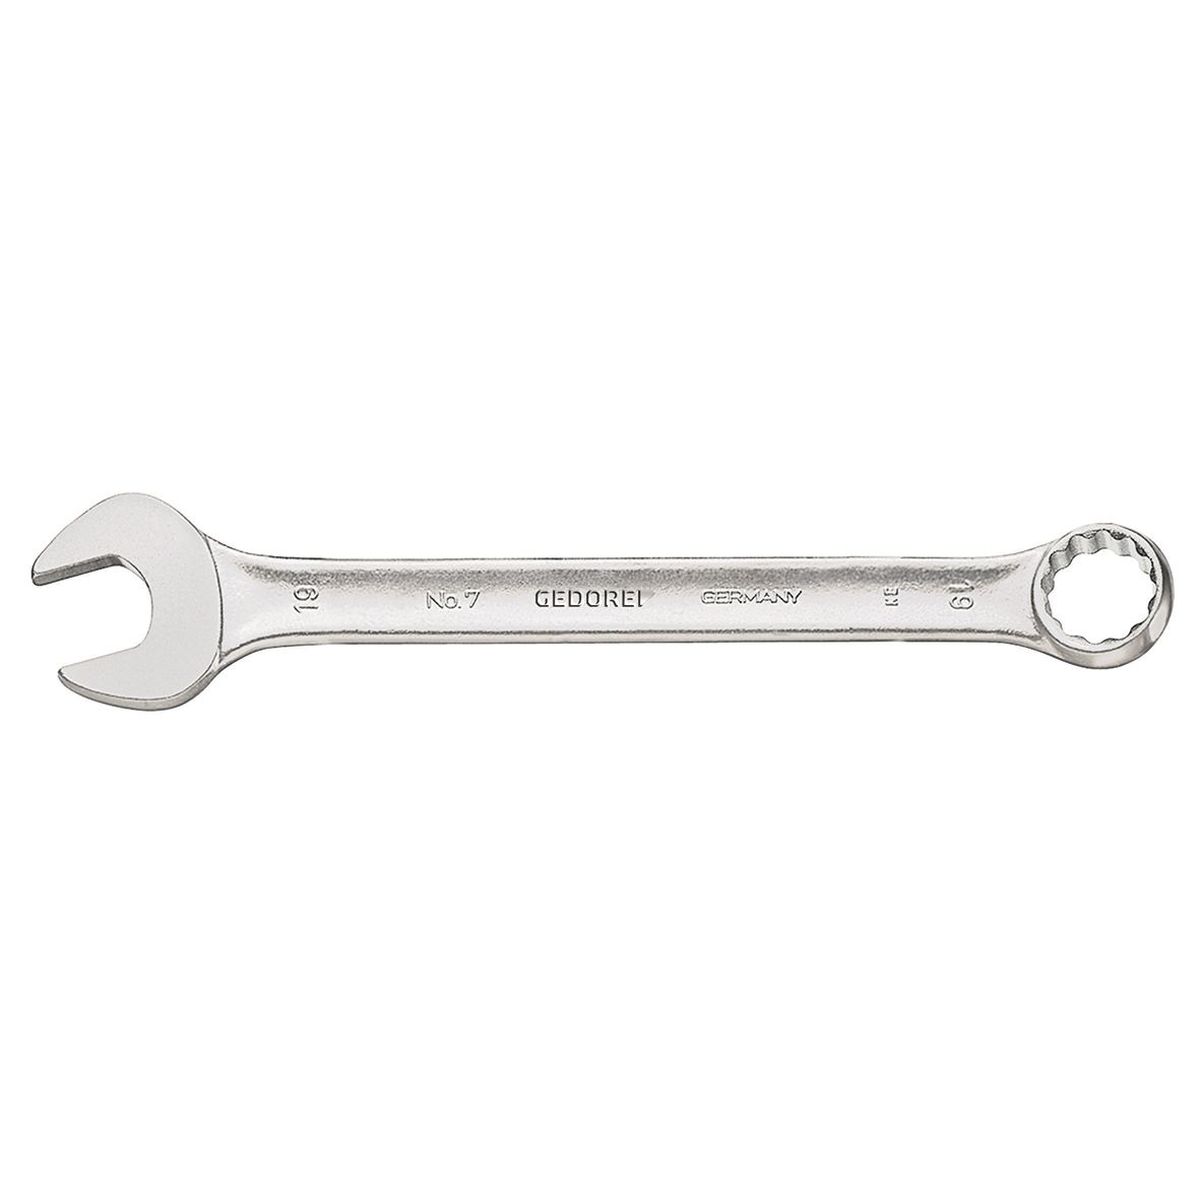 Combination spanner 25mm No.7 25 Gedore